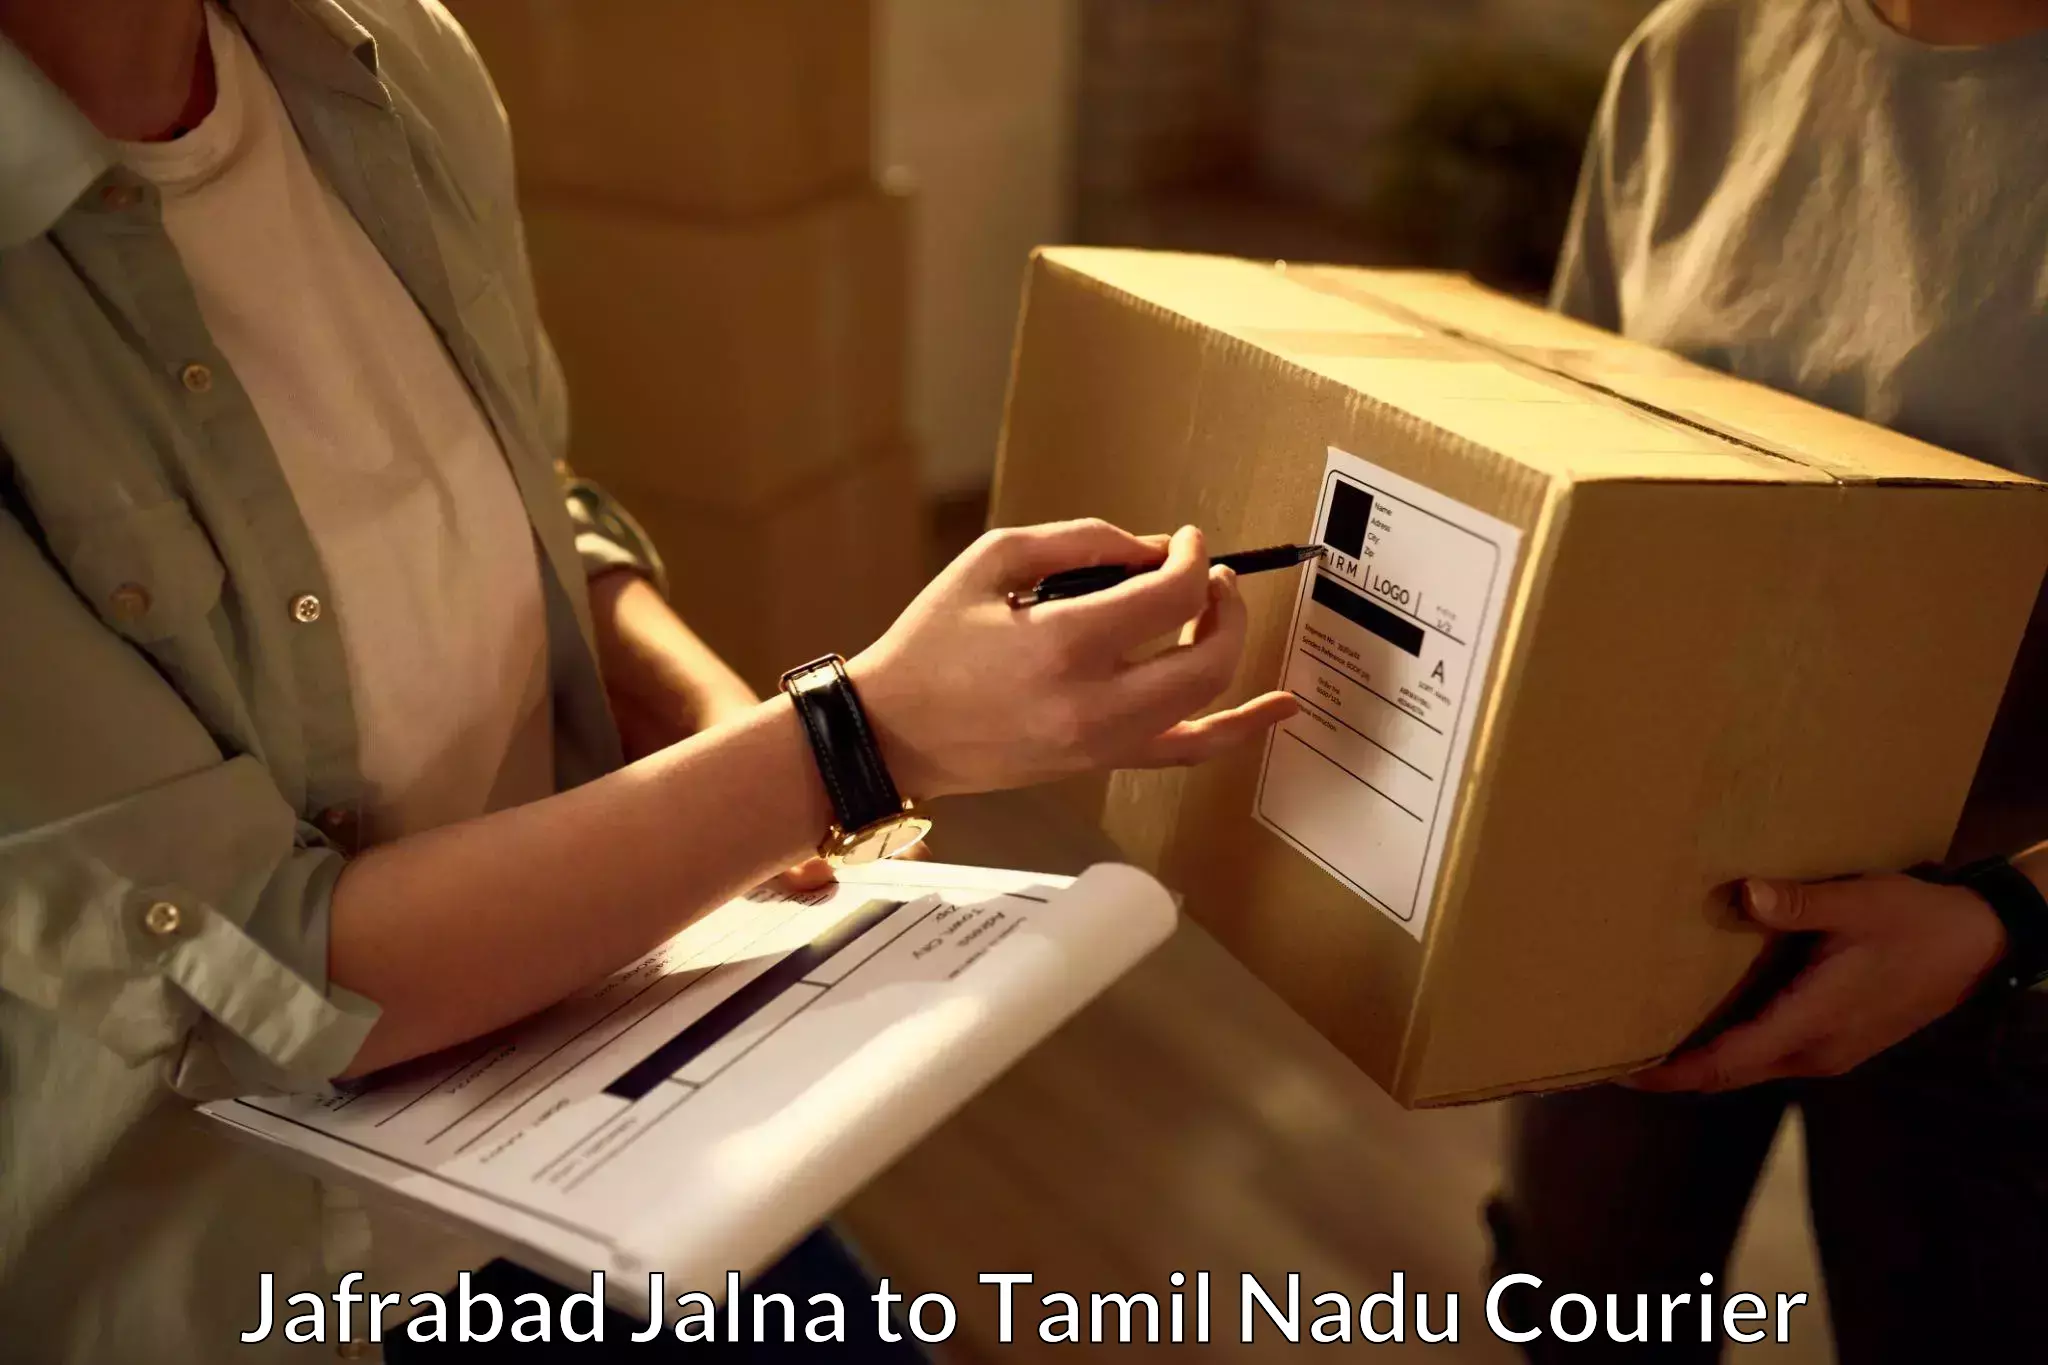 Courier service booking Jafrabad Jalna to Gummidipoondi